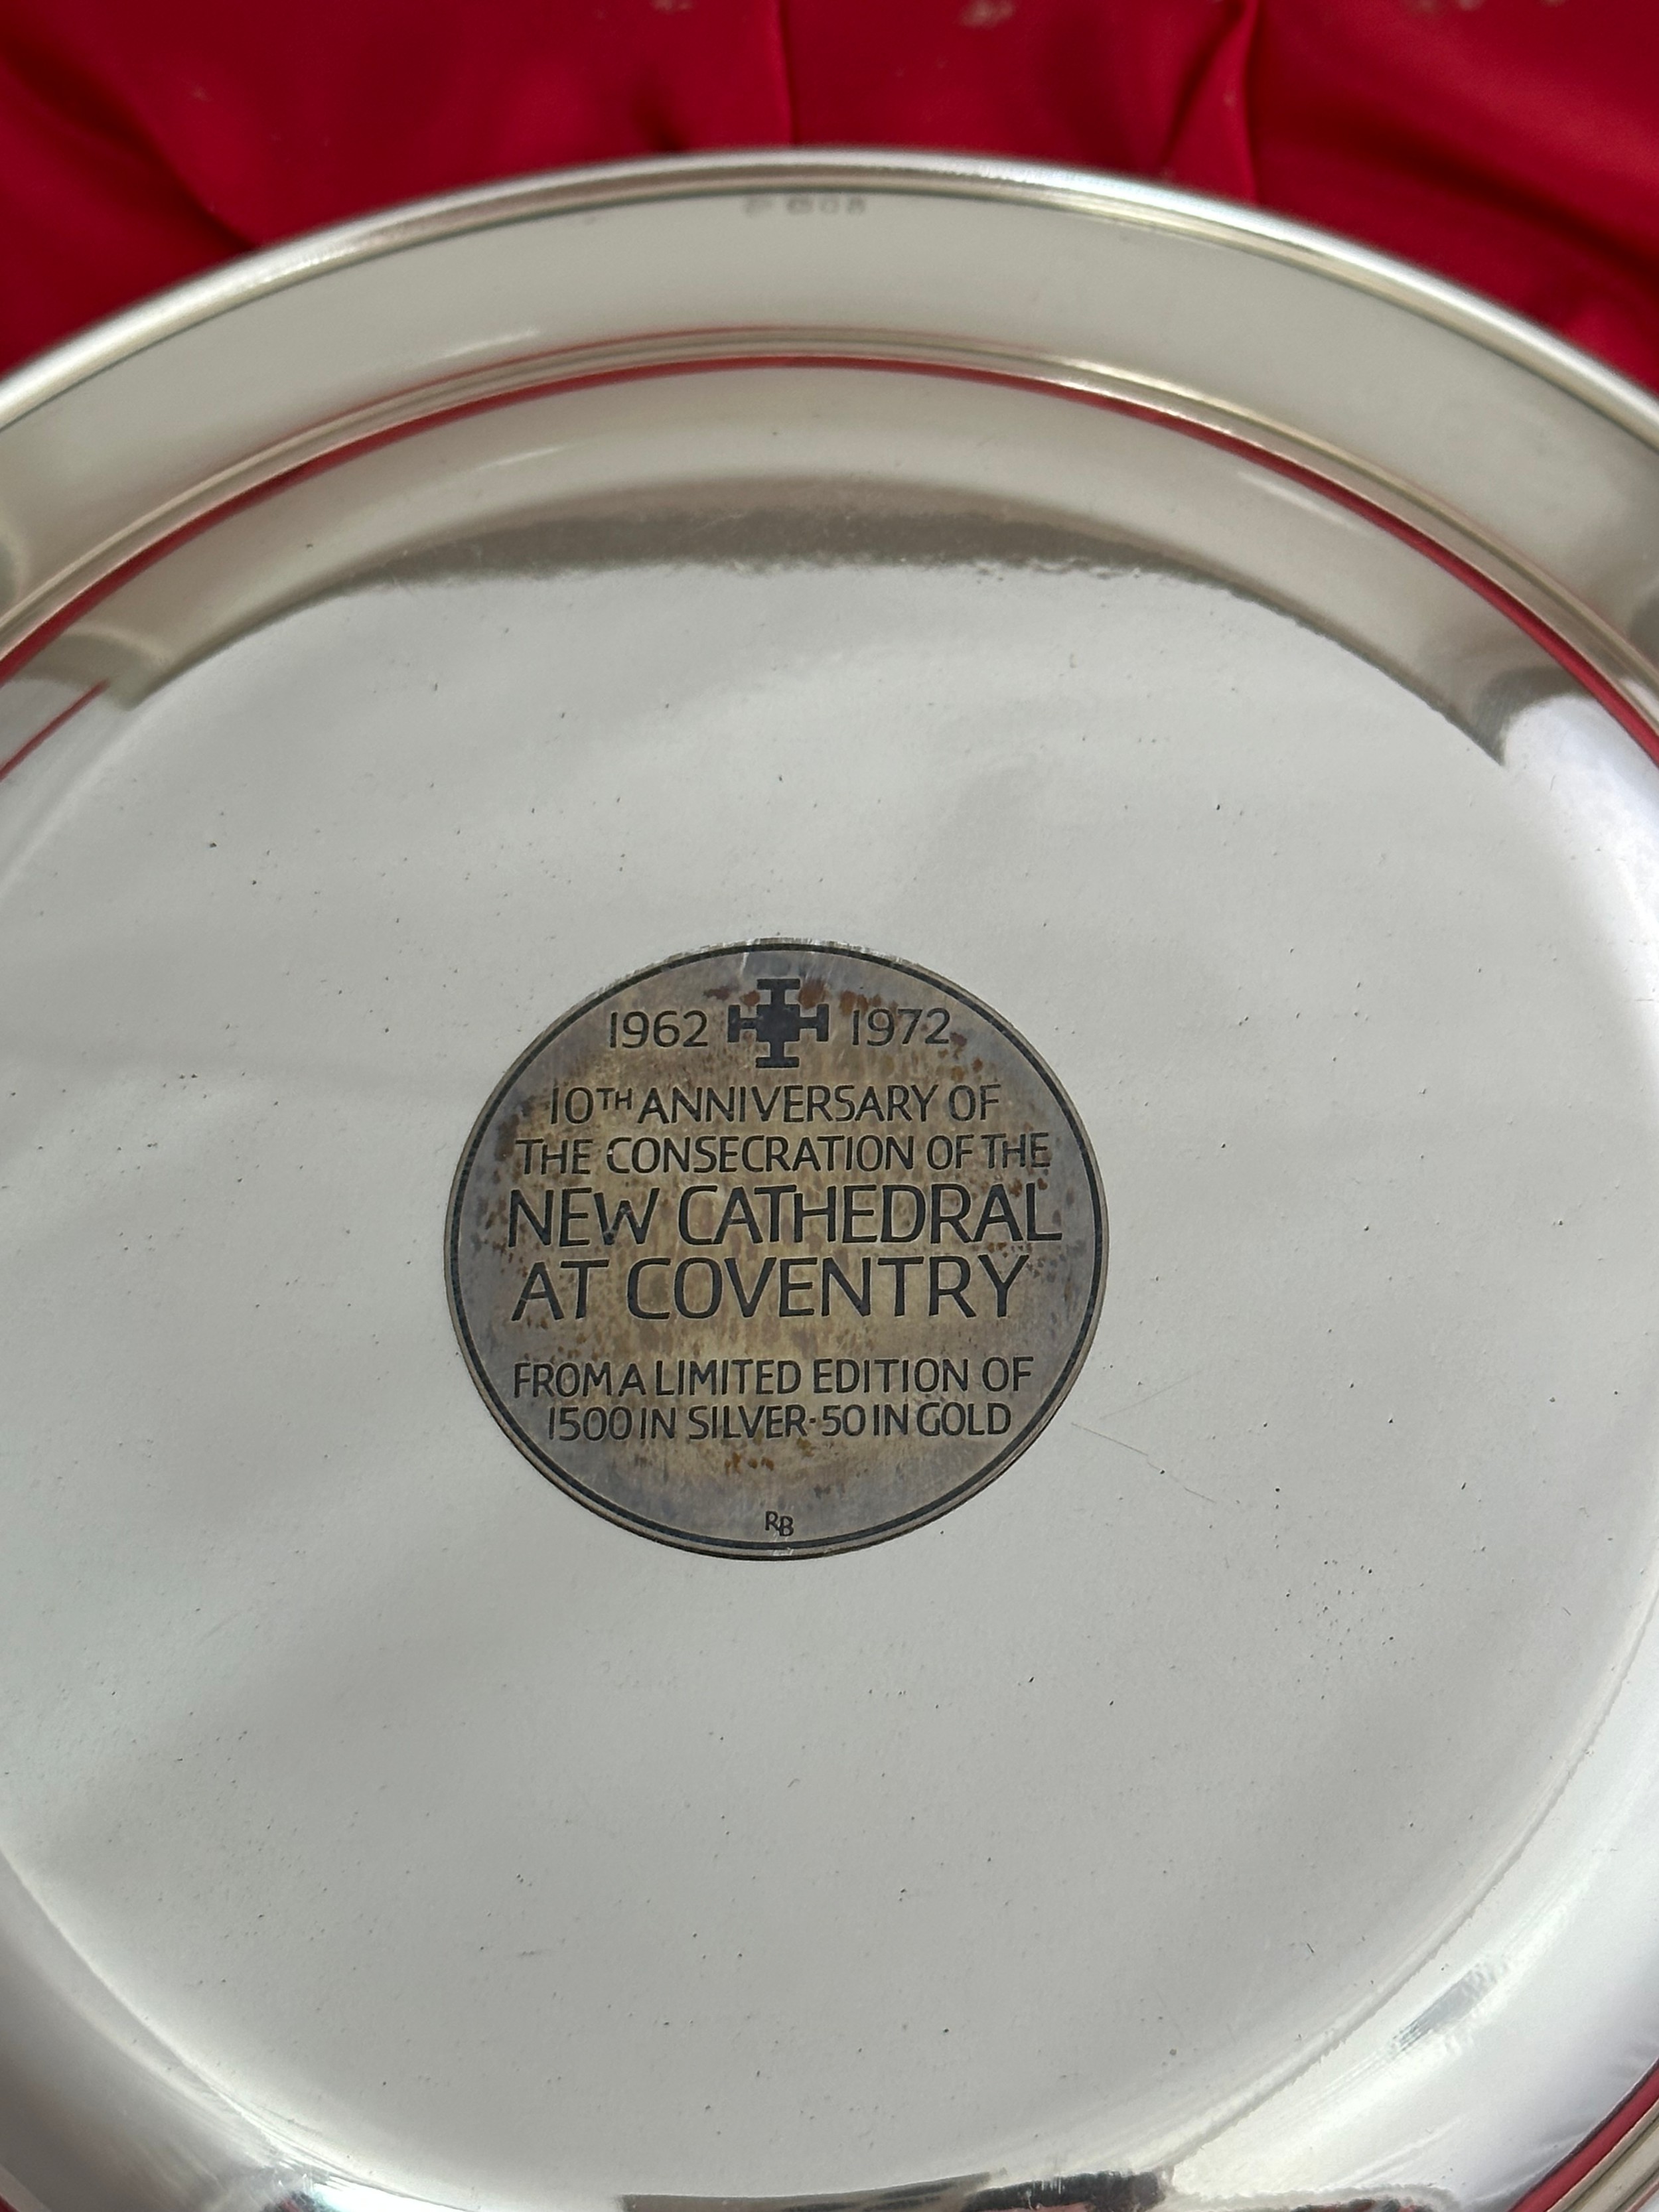 Coventry Cathedral silver 'Armada' style dish commemorating the 10th anniversary of the consecration - Image 2 of 3